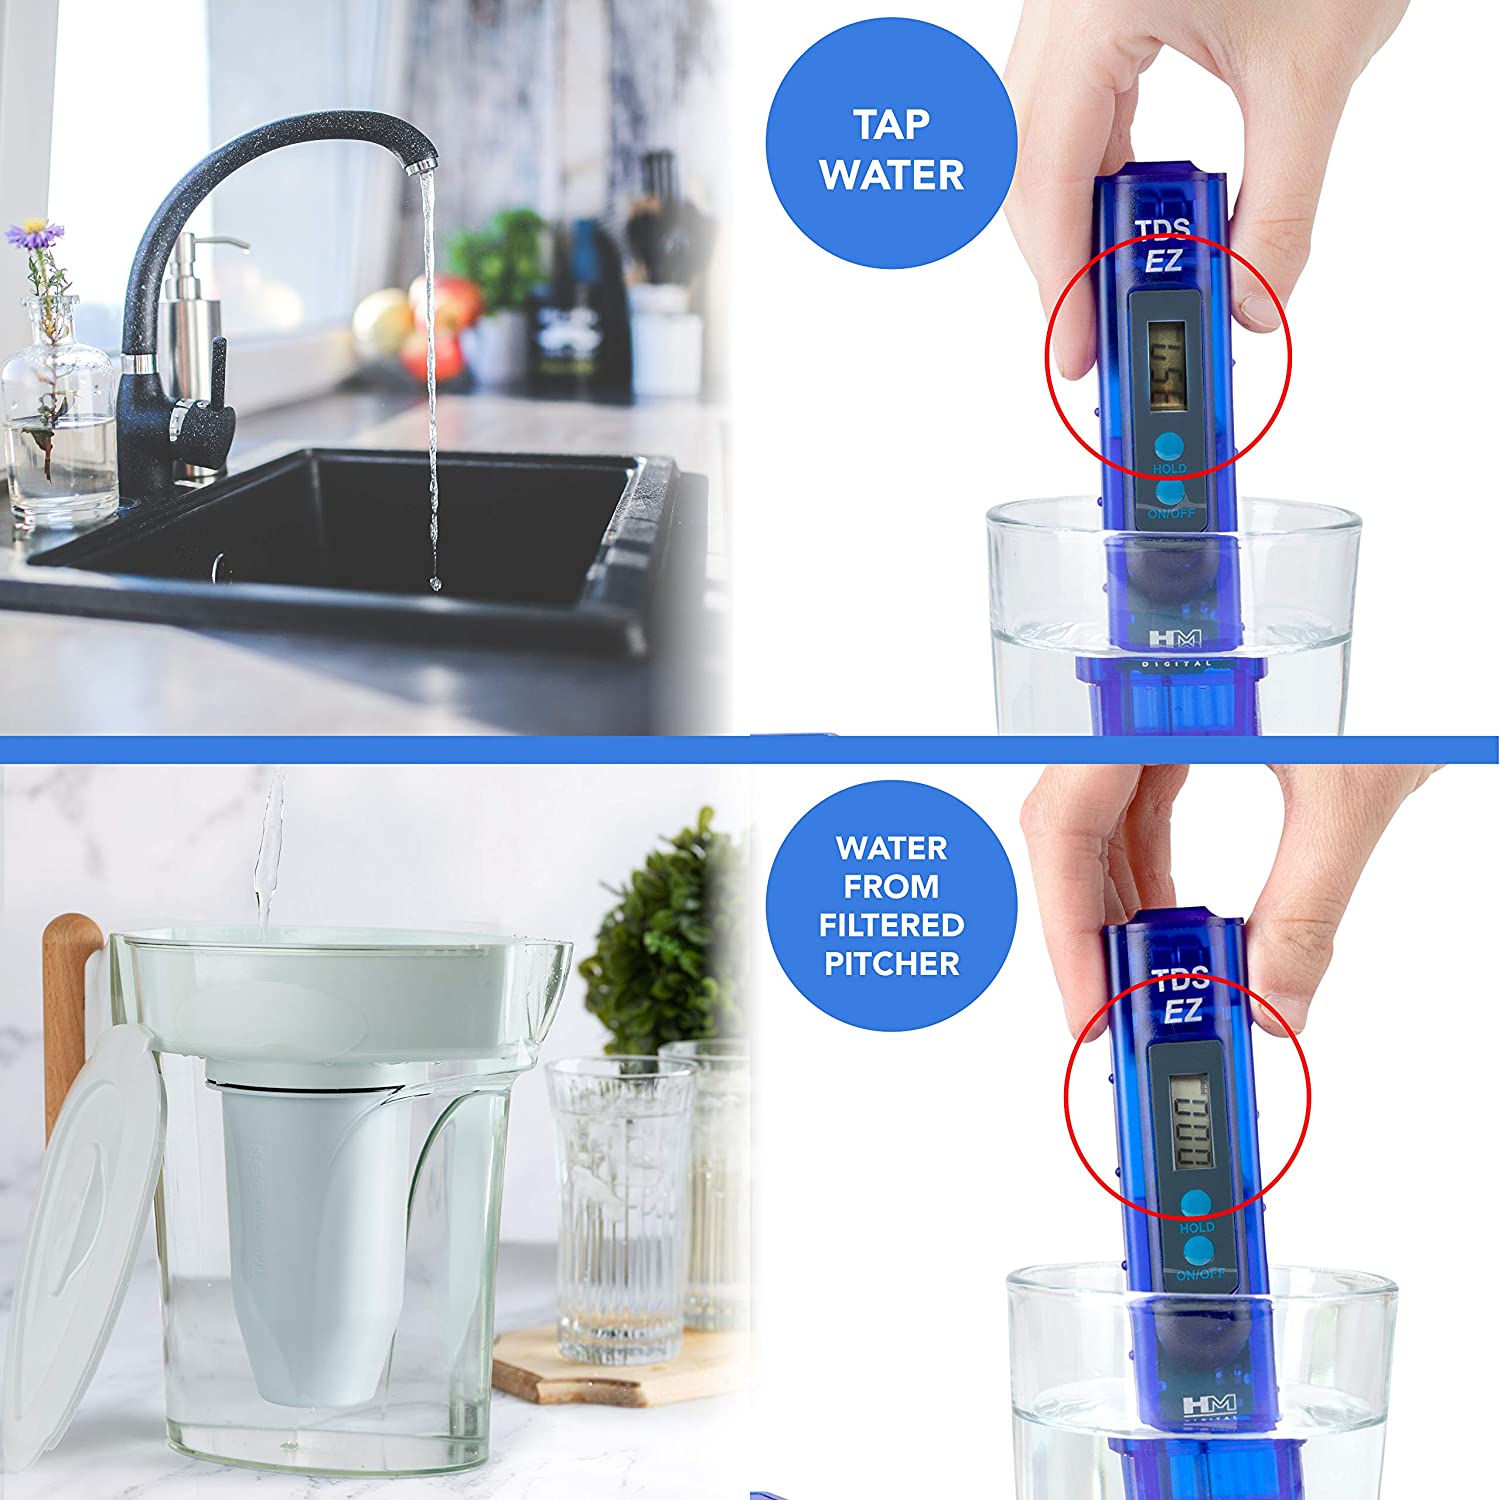 Nakii Water Filter Pitcher - Long Lasting Supreme Fast Filtration Purification Technology, Removes Chlorine, Fluoride Clean Tasting Water, Certified, - image 2 of 6